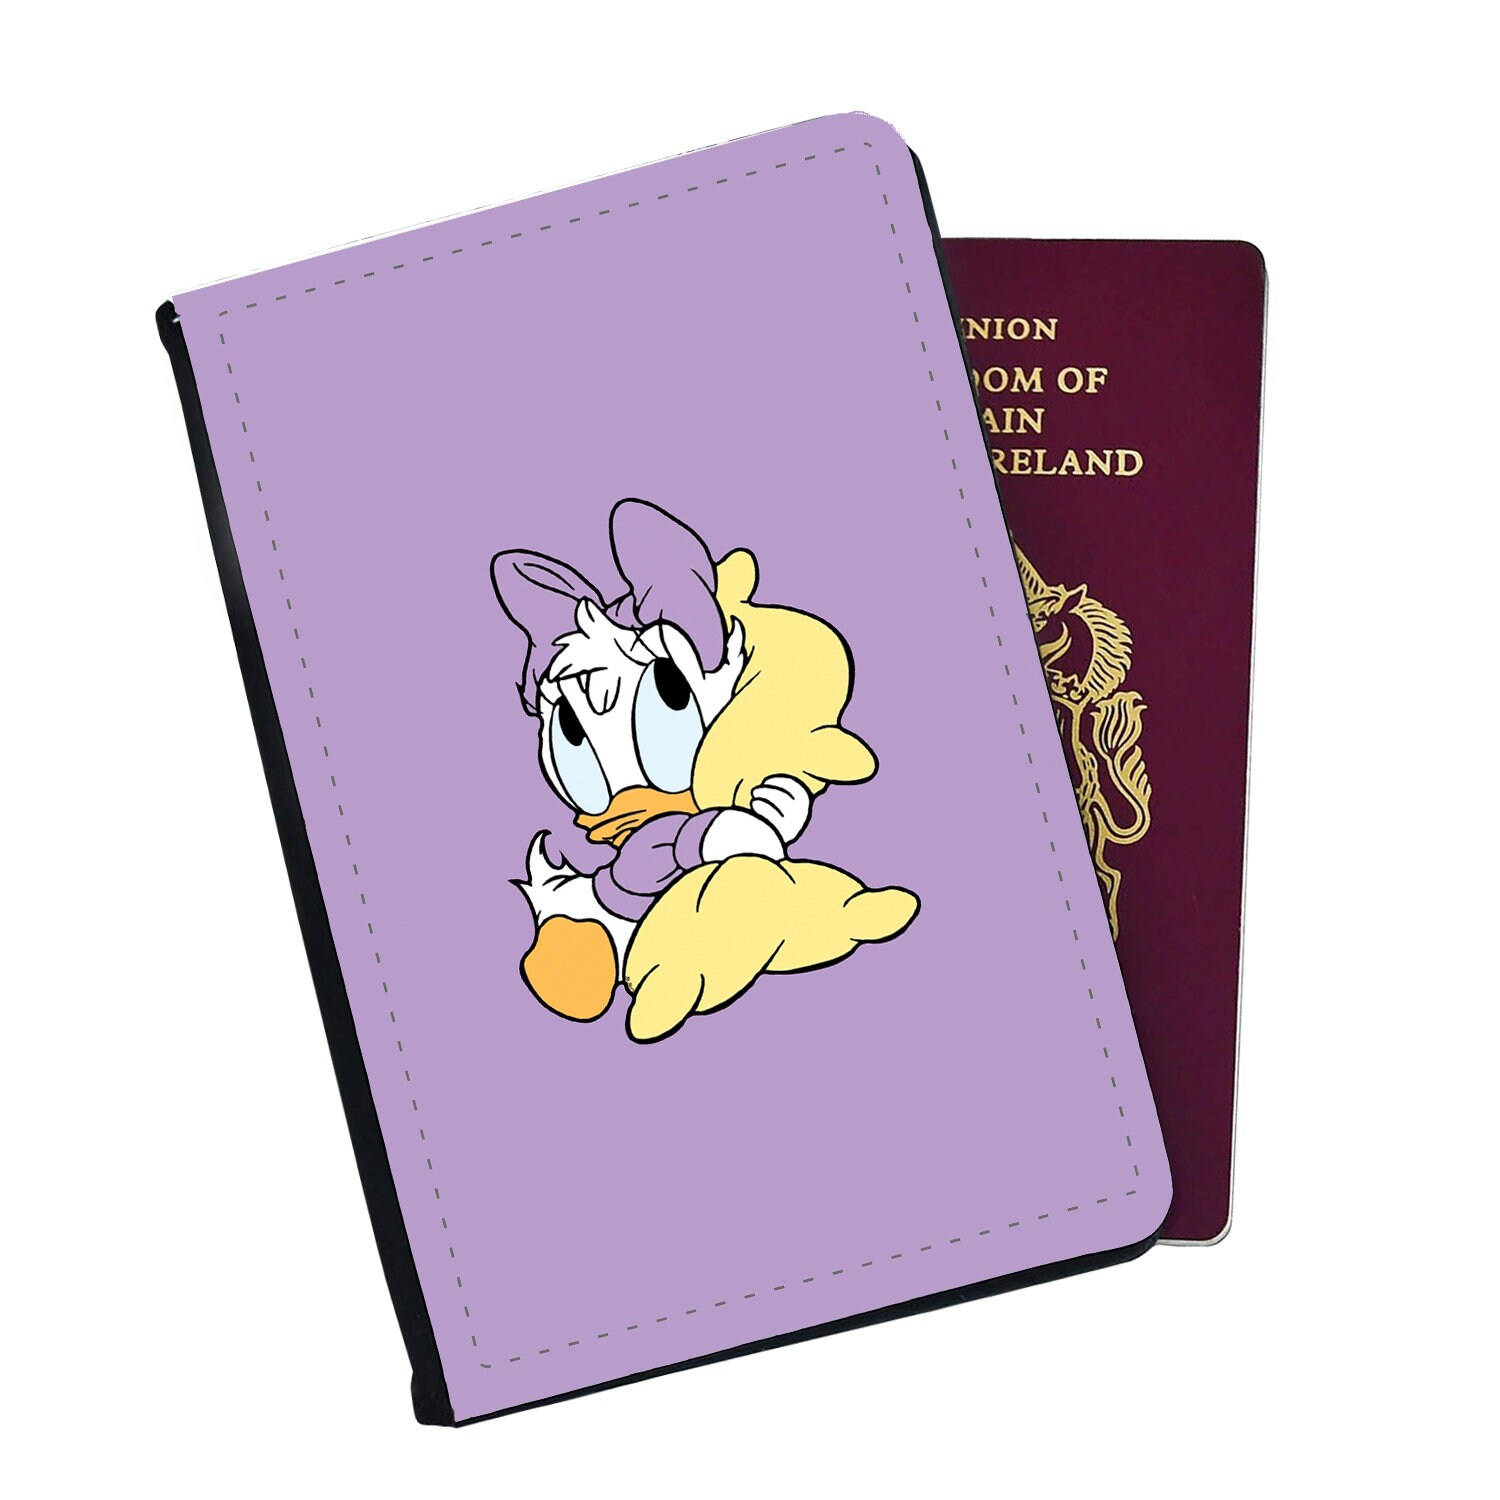 Personalised Passport Cover and Luggage Tag, Baby's First Holiday, Baby Donald Duck and Daisy, Travel Accessory Set, Custom Gift with Name